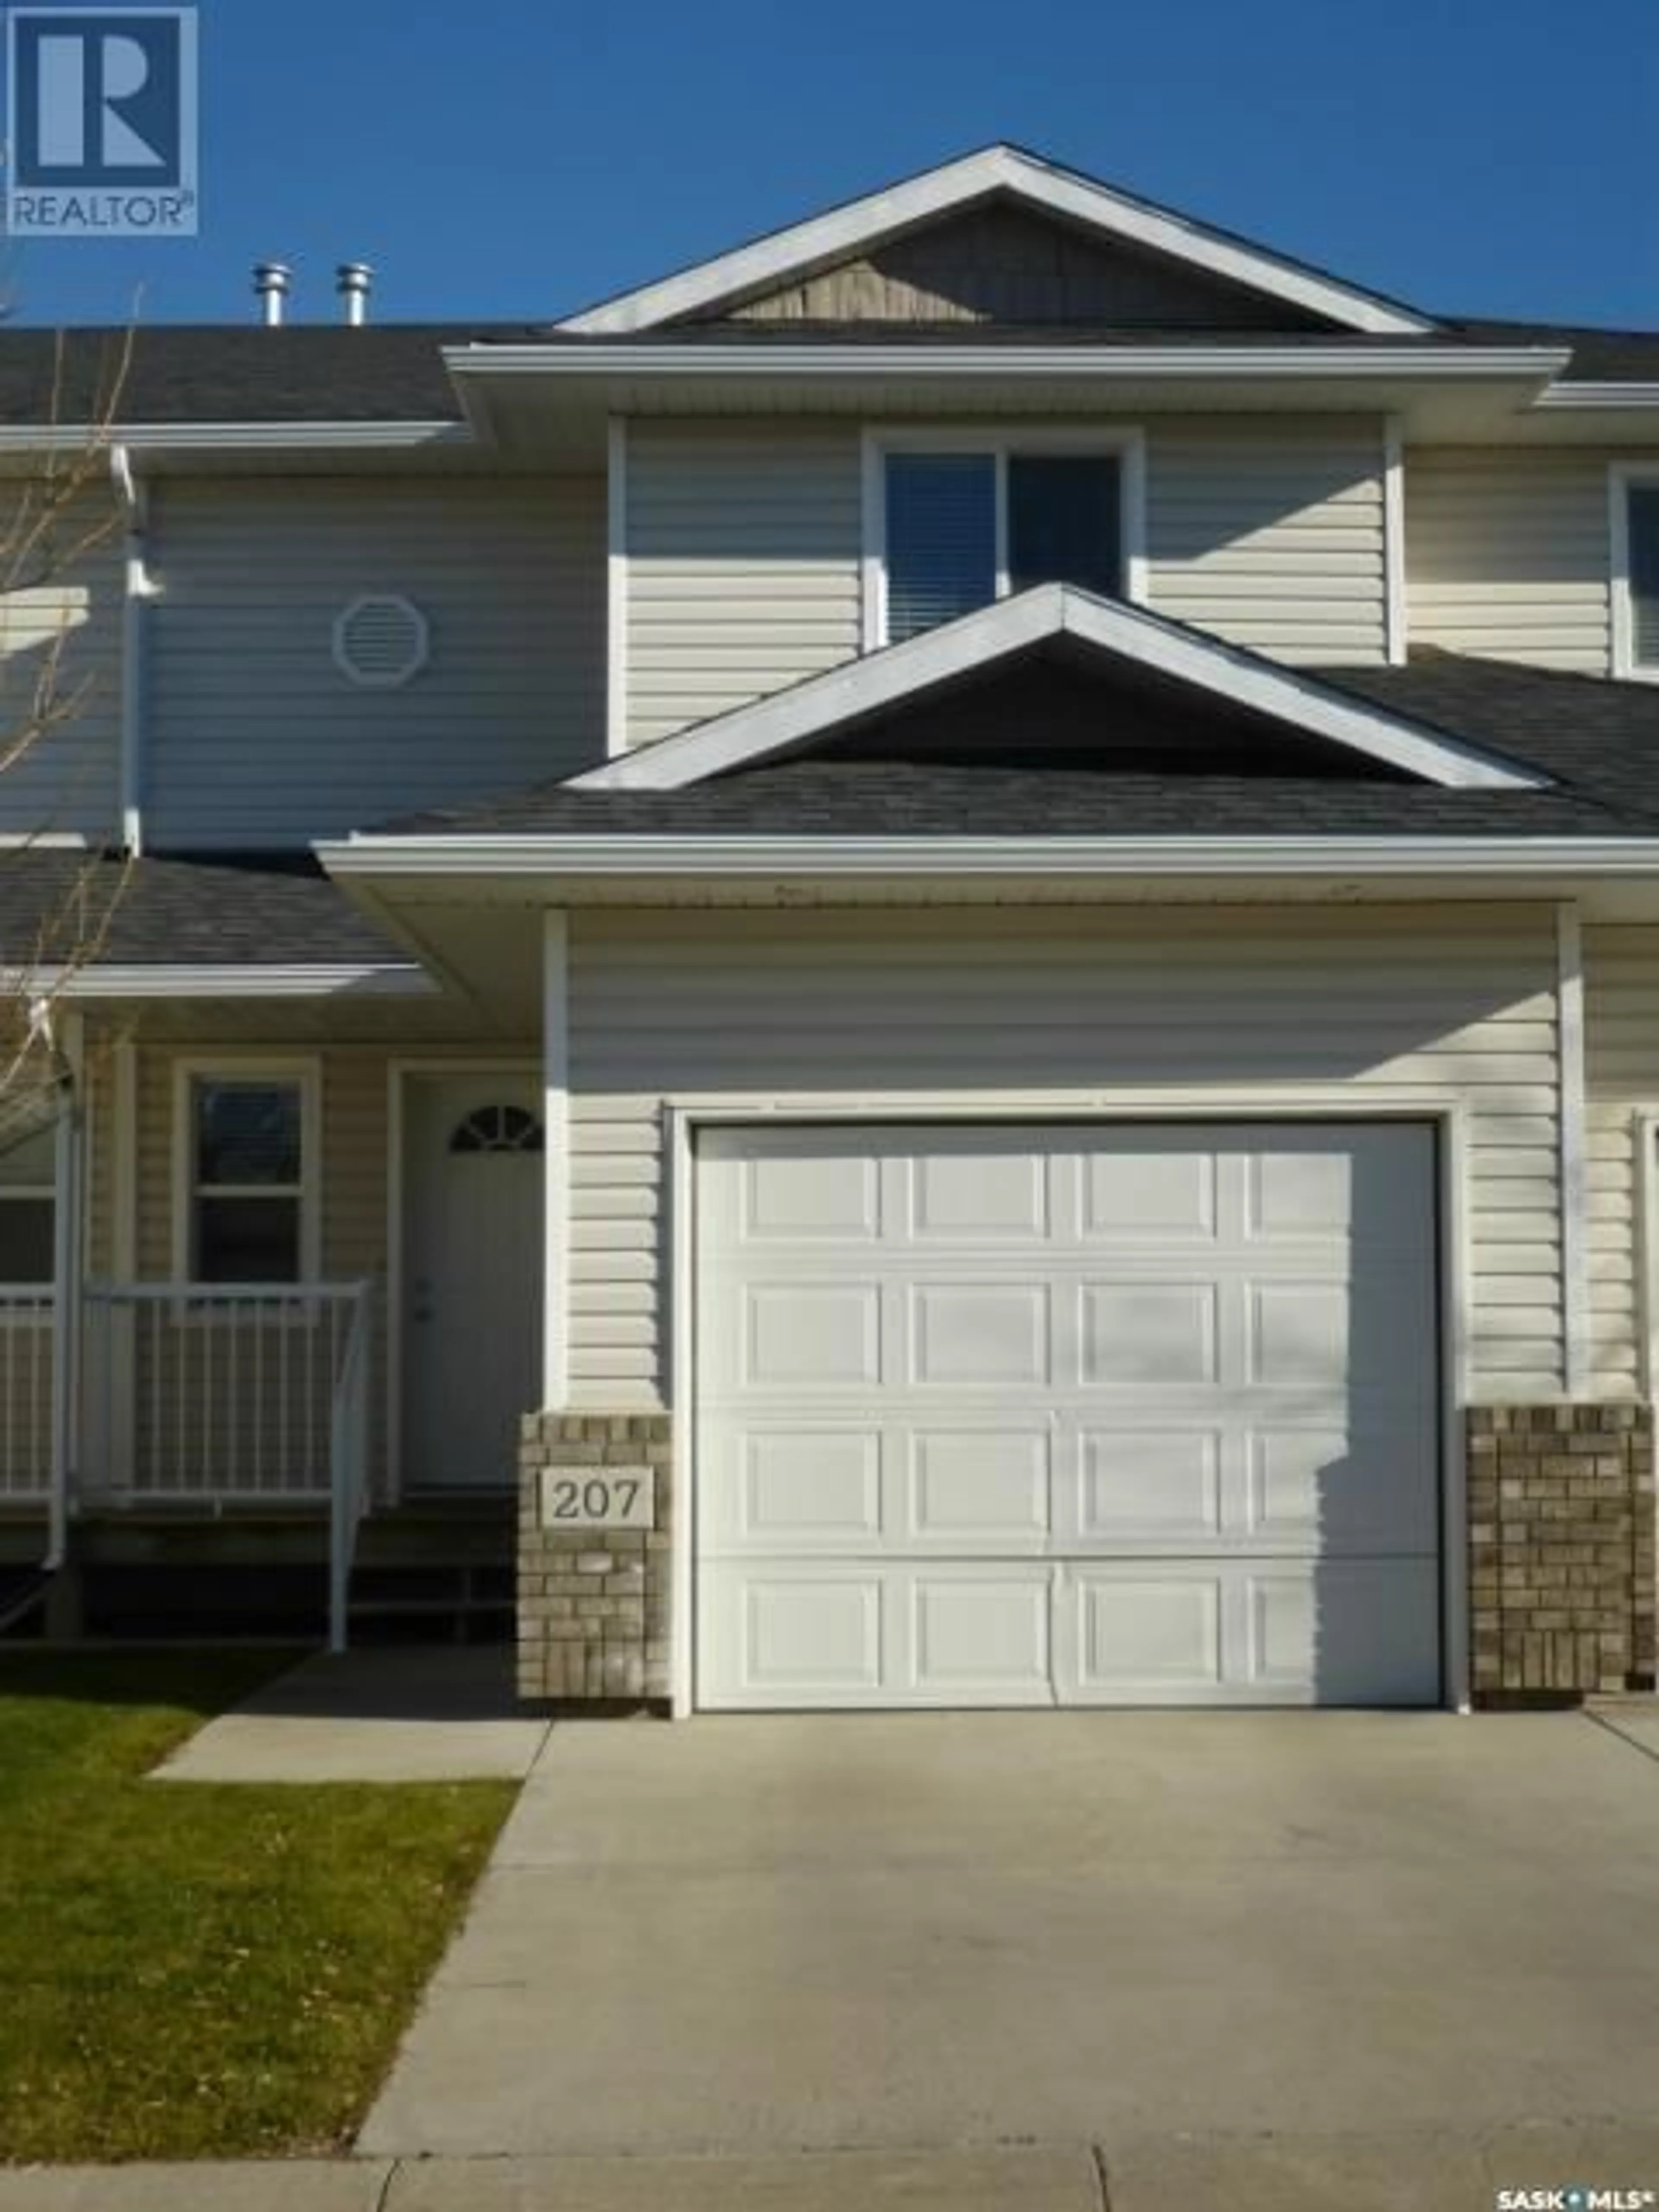 Home with vinyl exterior material for 207 851 Chester ROAD, Moose Jaw Saskatchewan S6J0A4